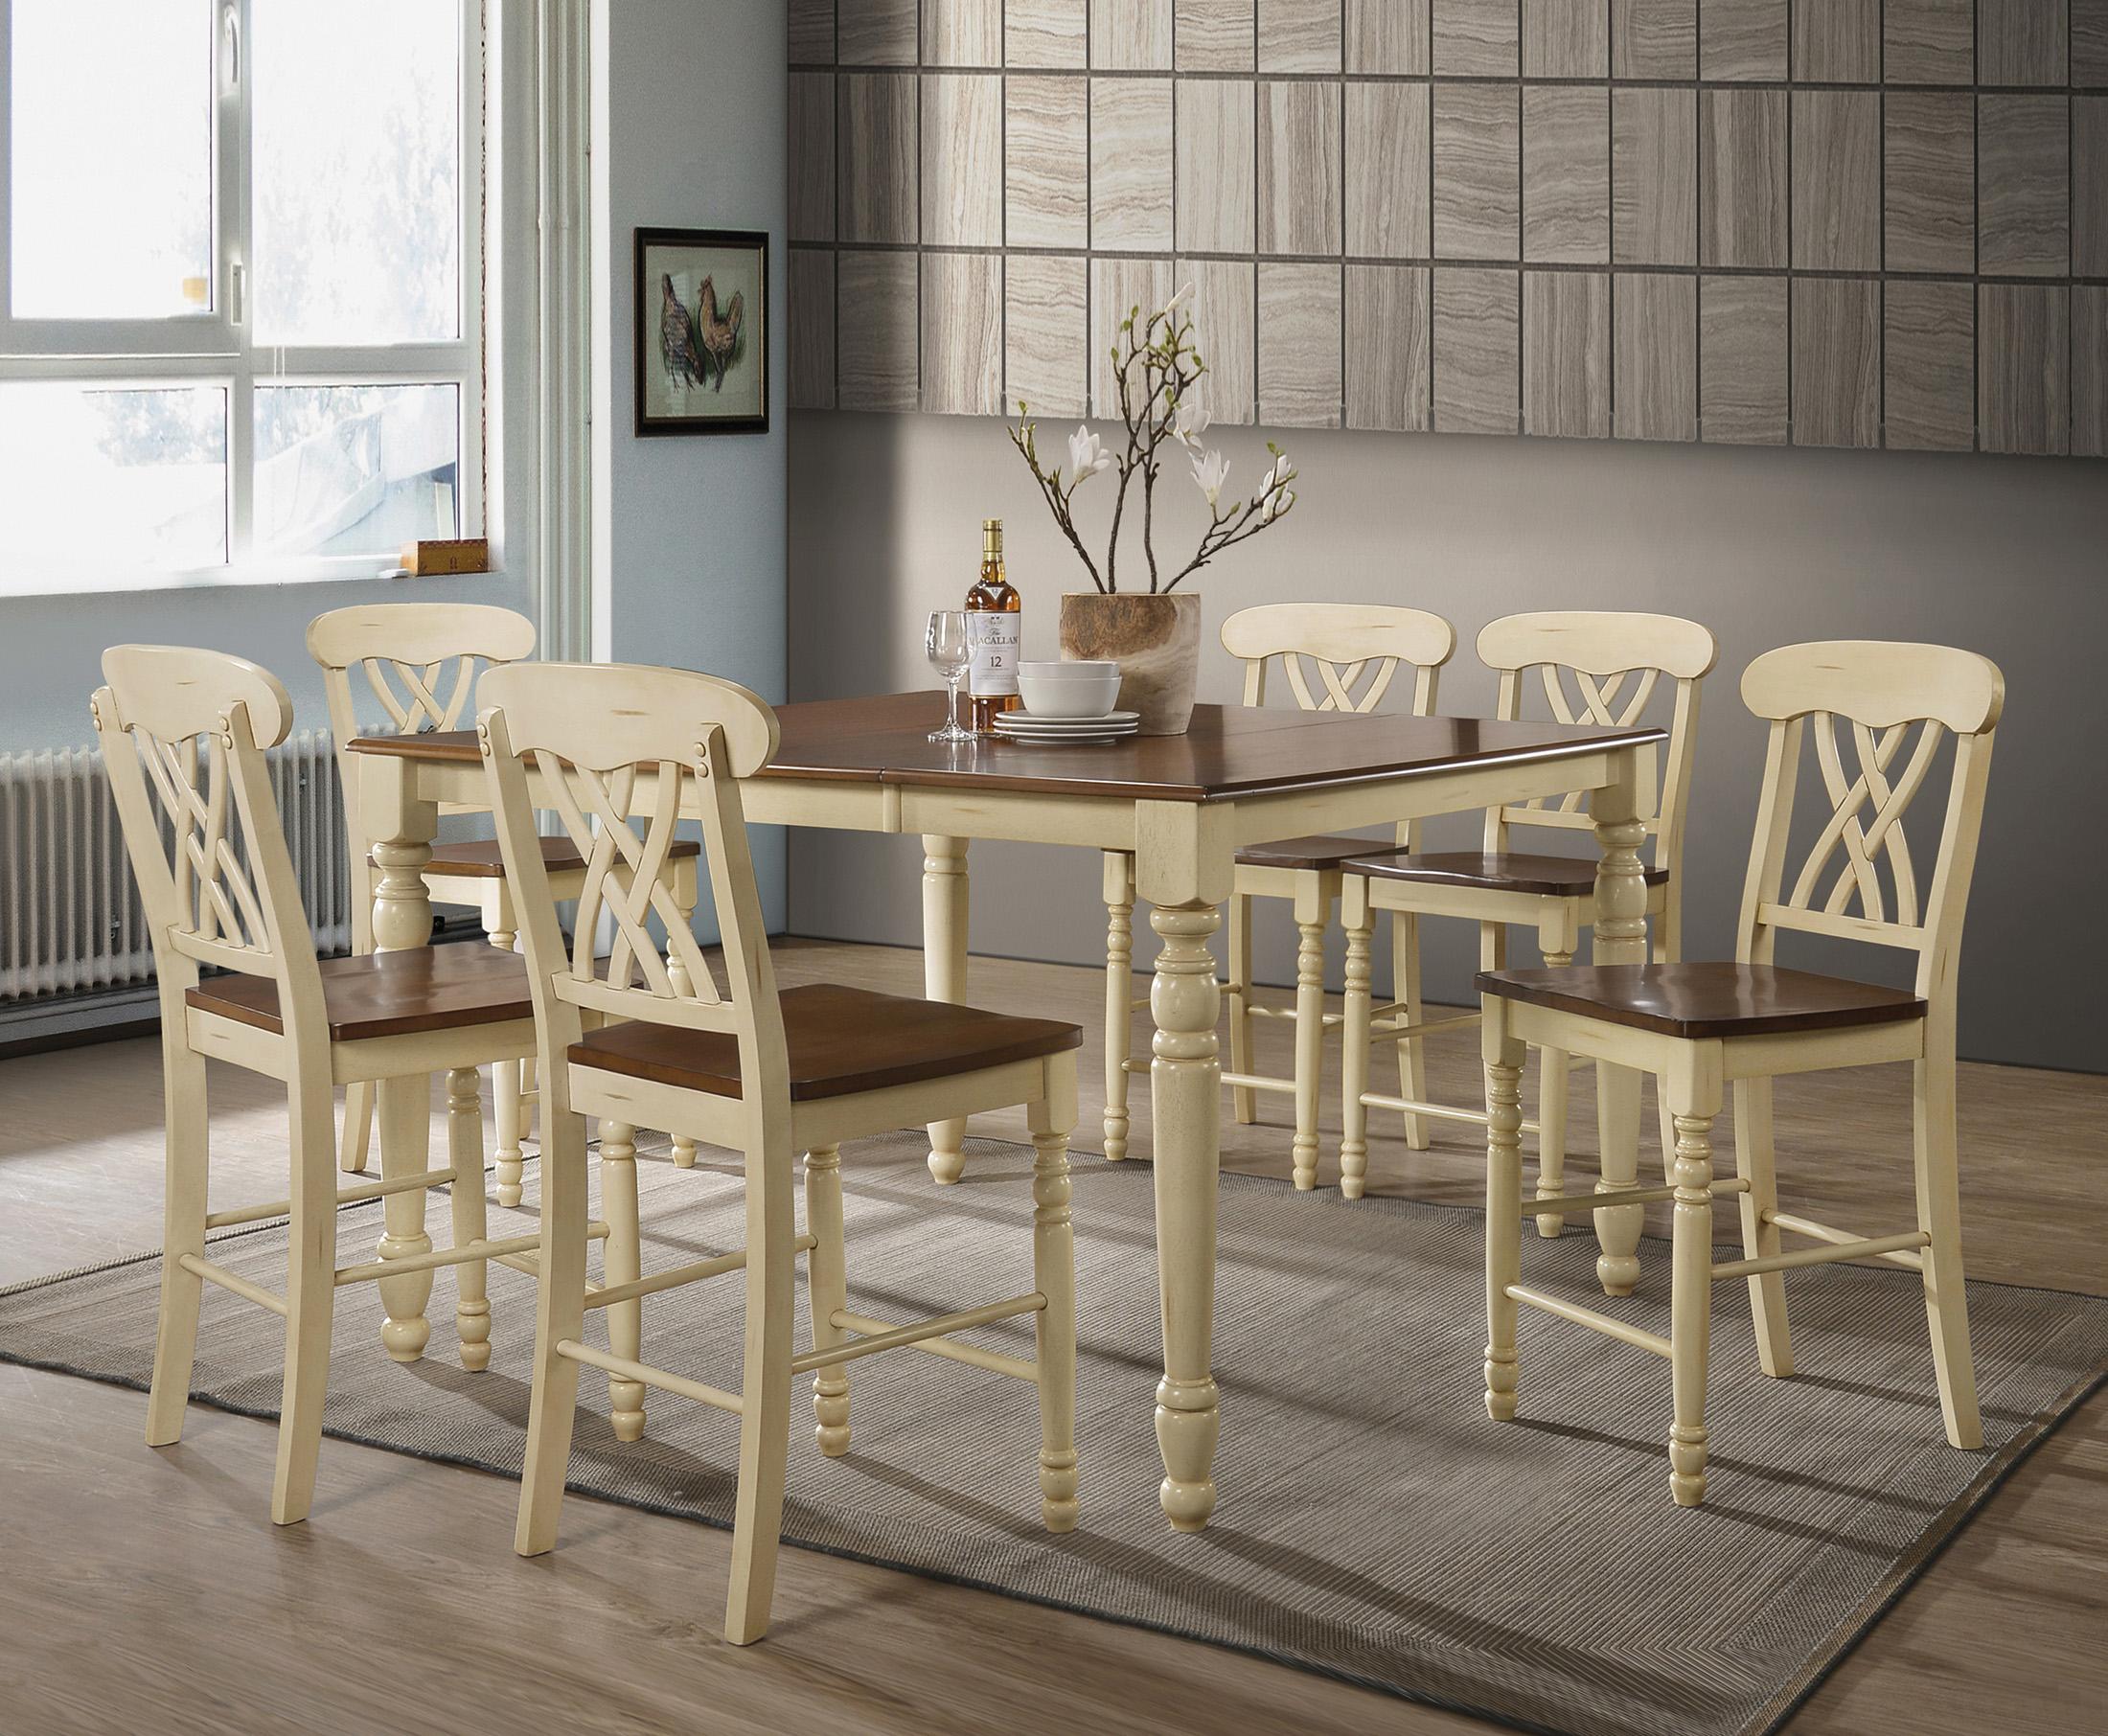 Traditional, Cottage, Farmhouse Dining Table Set Dylan 70430-Set-7 in Oak, Ivory 